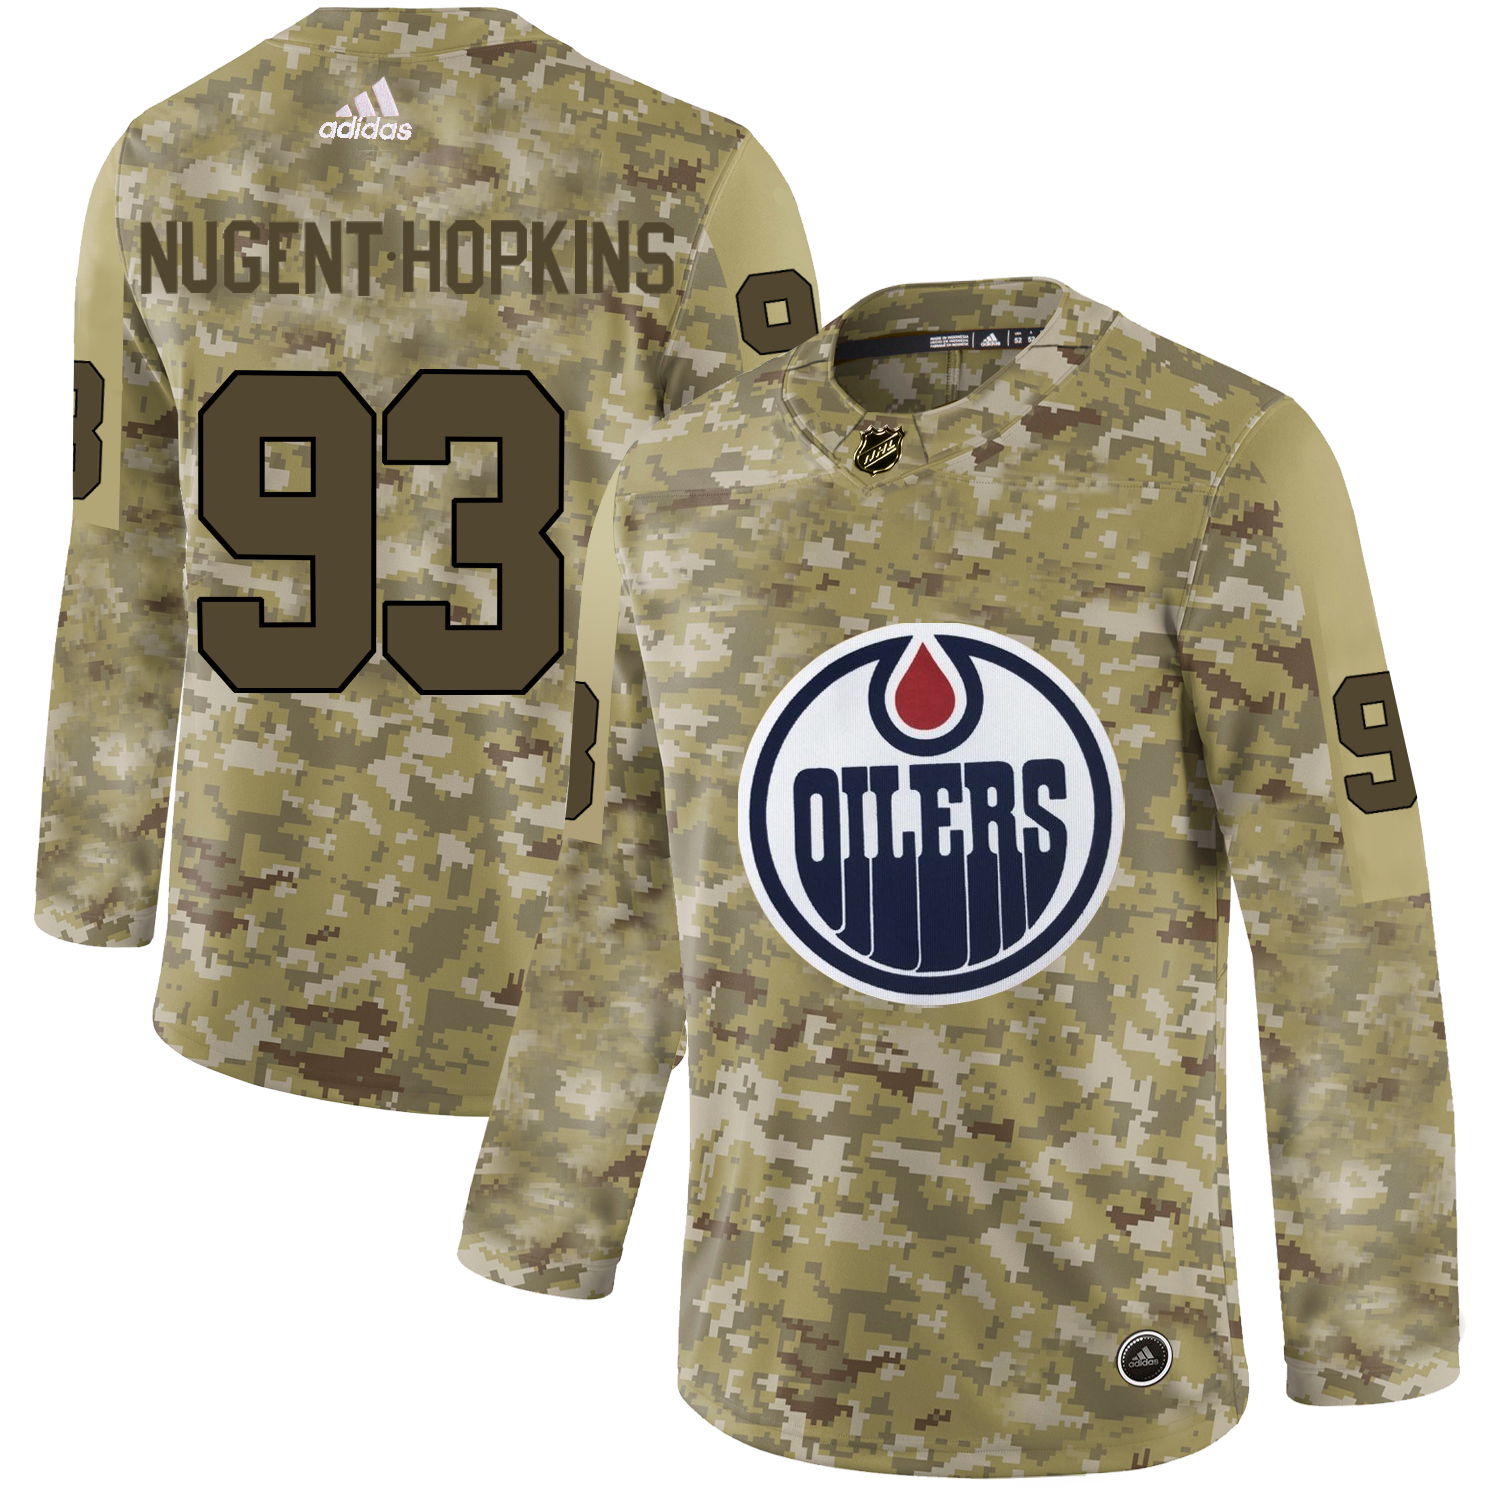 Adidas Oilers #93 Ryan Nugent-Hopkins Camo Authentic Stitched NHL Jersey